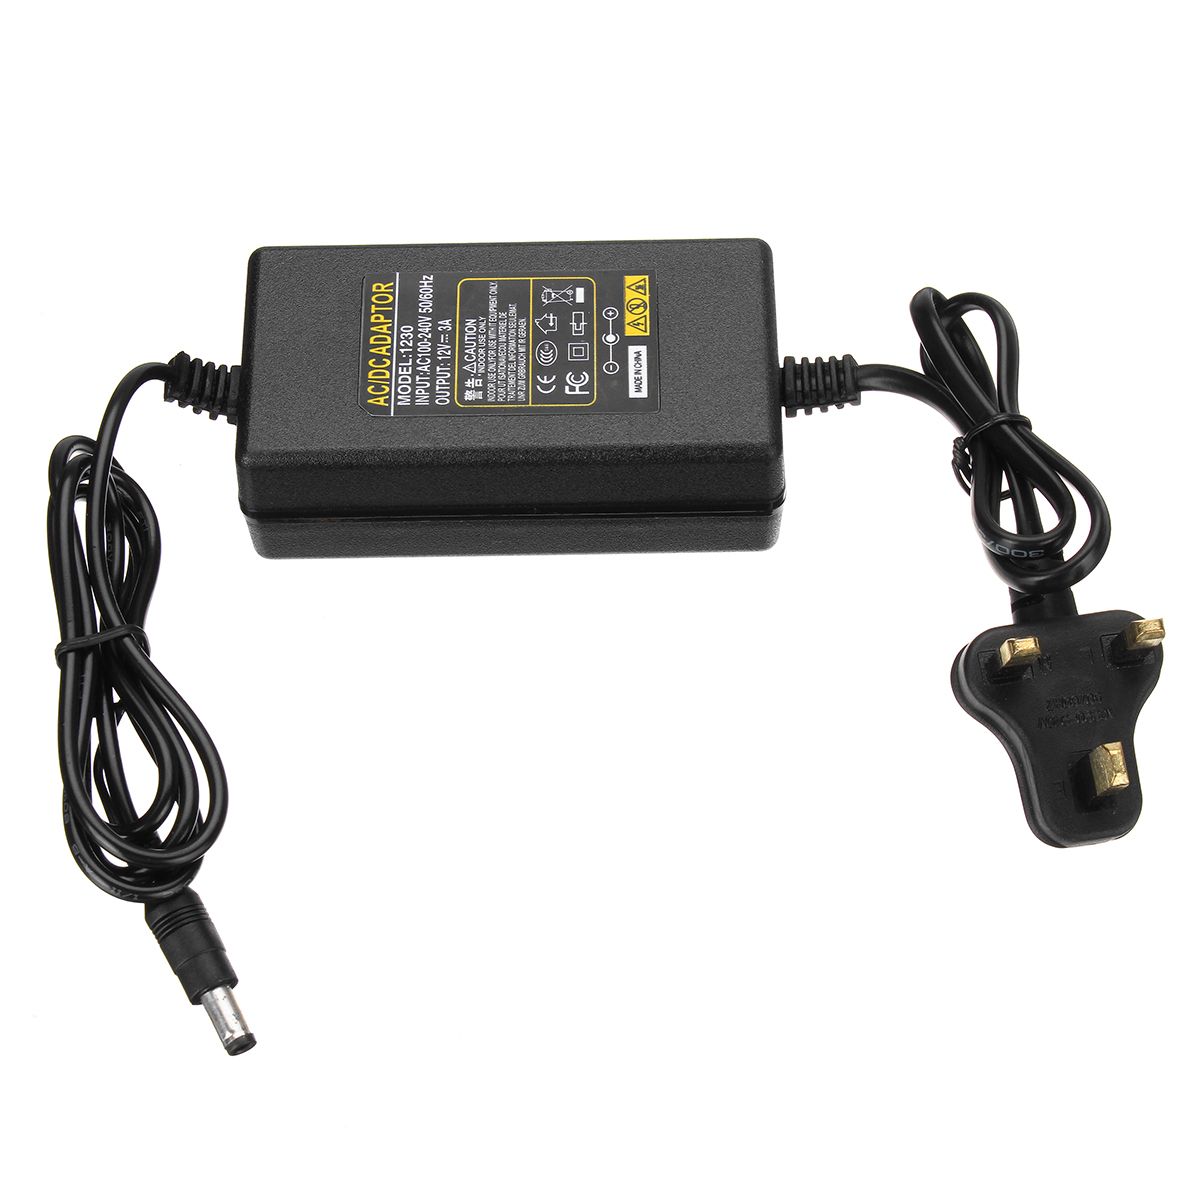 AC100-240V-to-DC12V-3A-36W-Non-Waterproof-Power-Supply-for-LED-Strip-Light-Cabinet-Lamp-UK-Plug-1334158